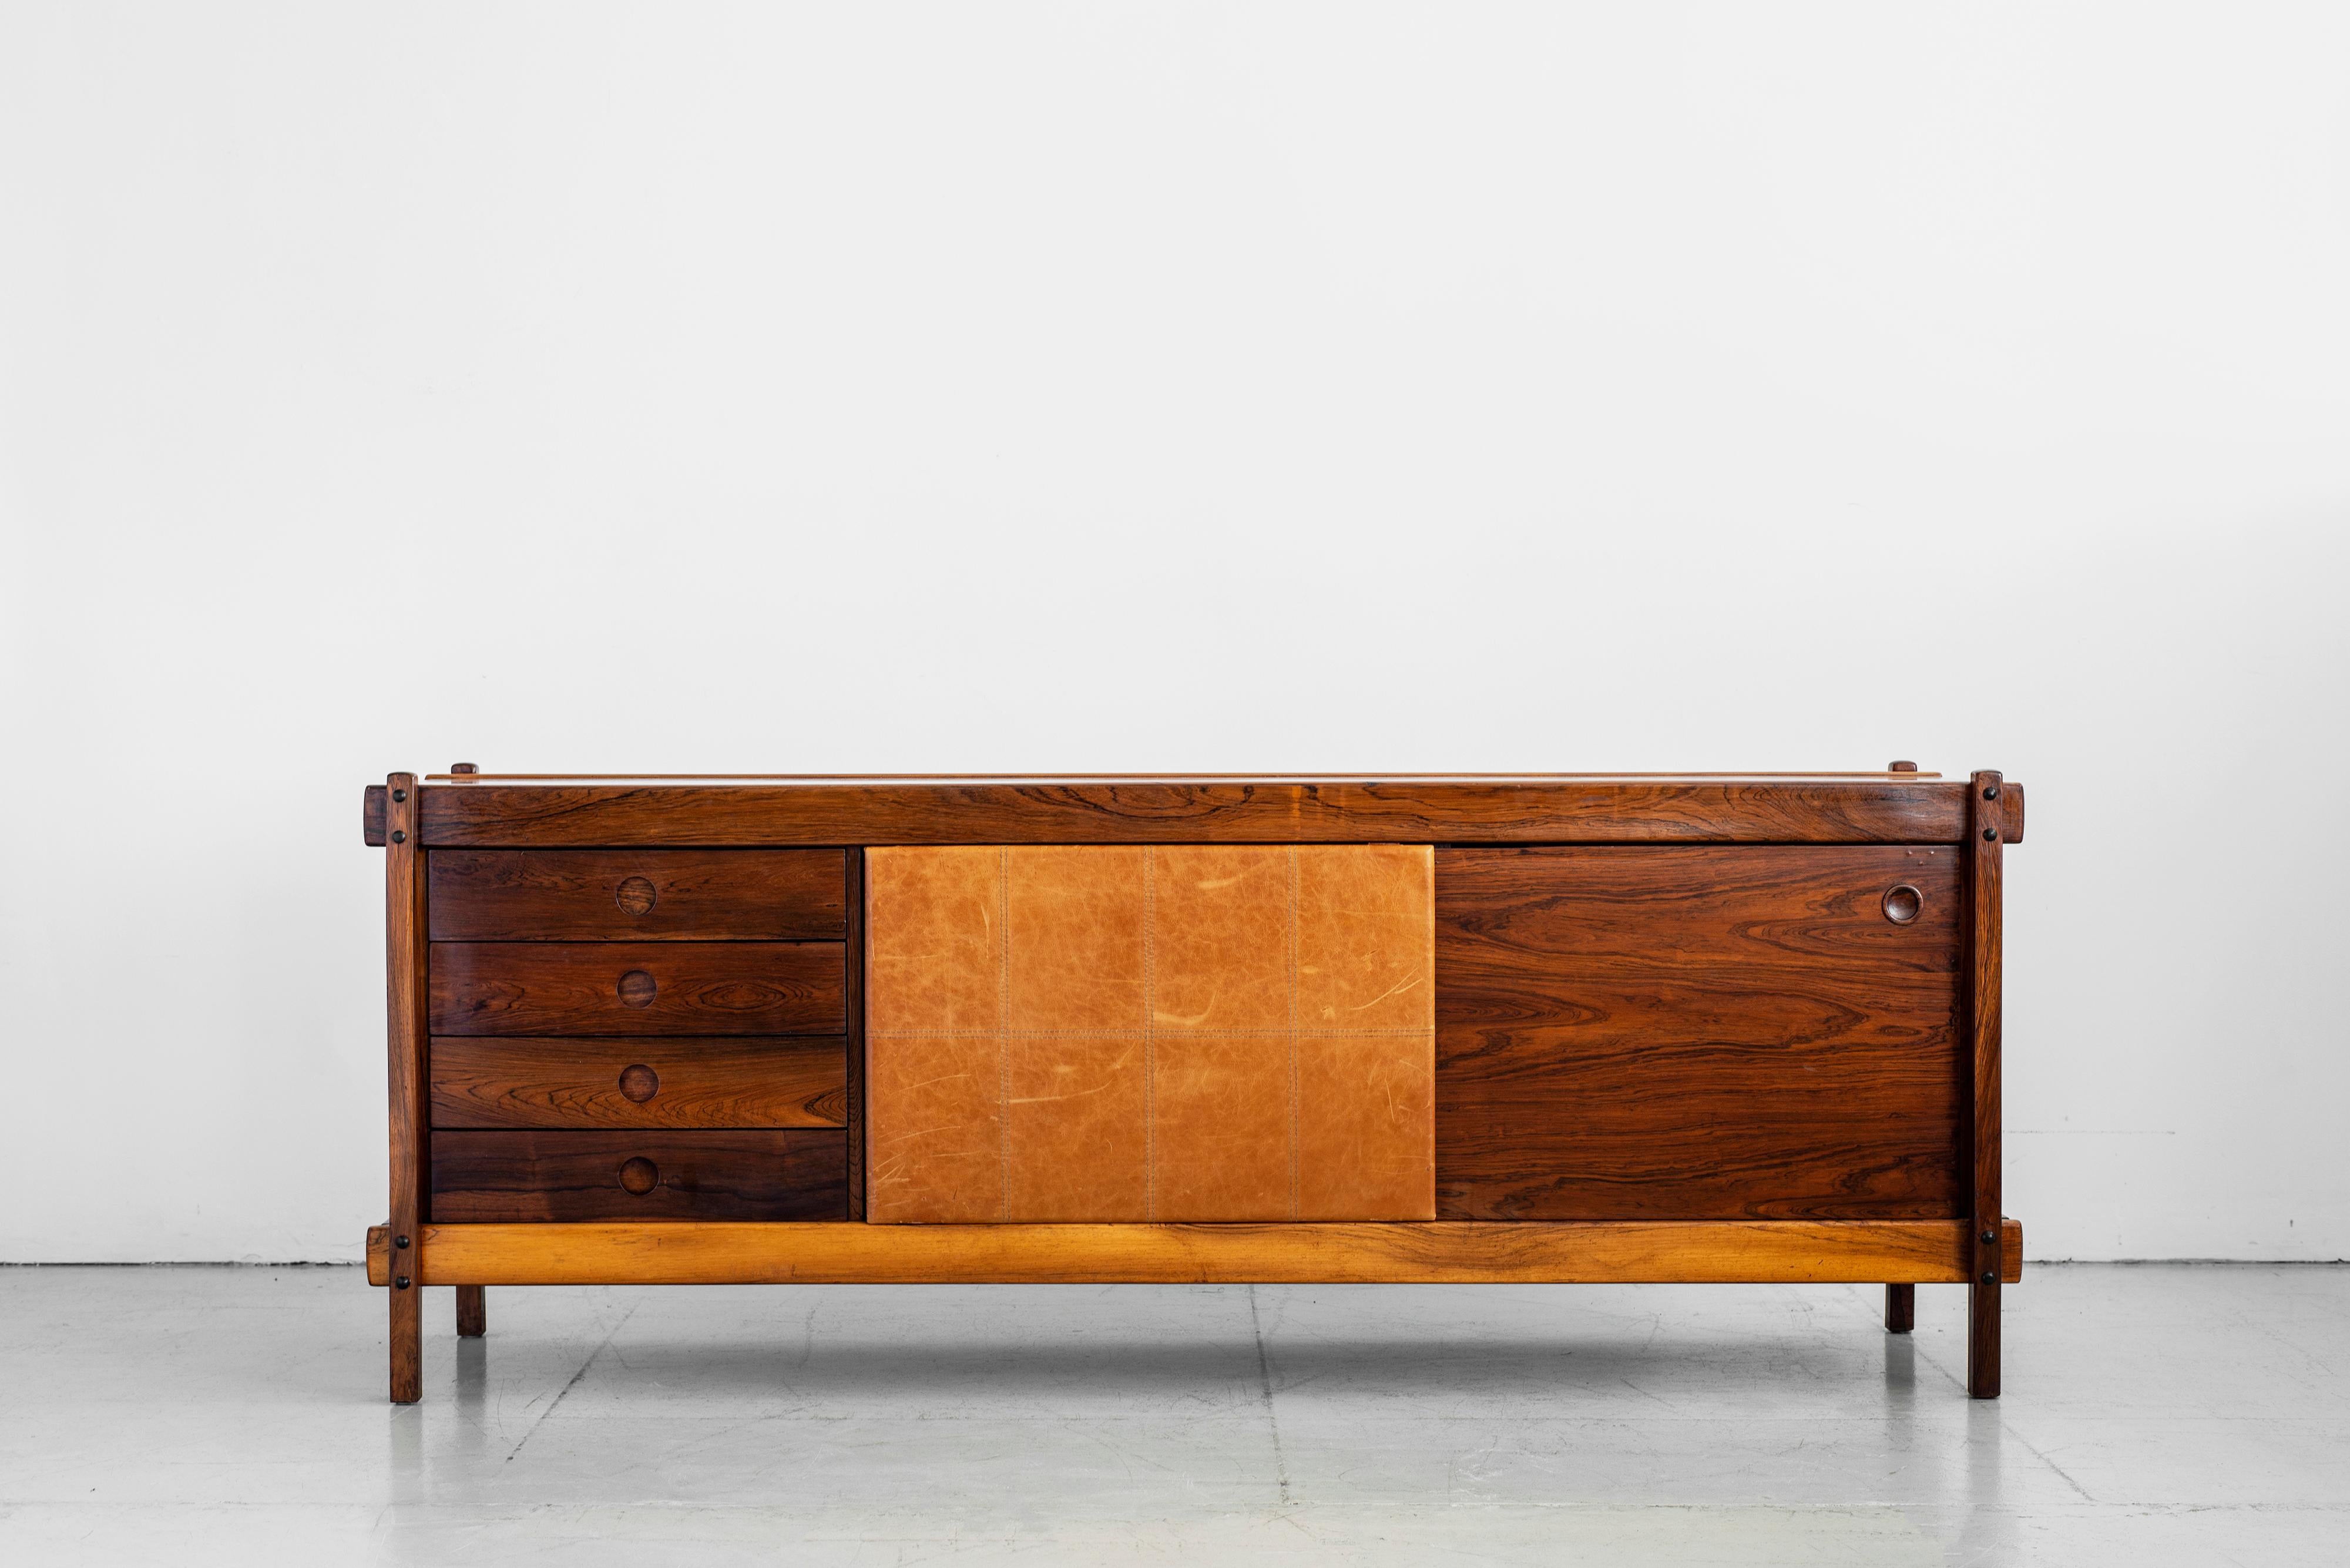 Handsome Sergio Rodriguez sideboard made of beautiful rosewood with stunning grain. Central panel door in brown saddle-stitched leather slides to reveal open shelvings but with exposed 4 drawers on the other. Original labels on back. Incredible